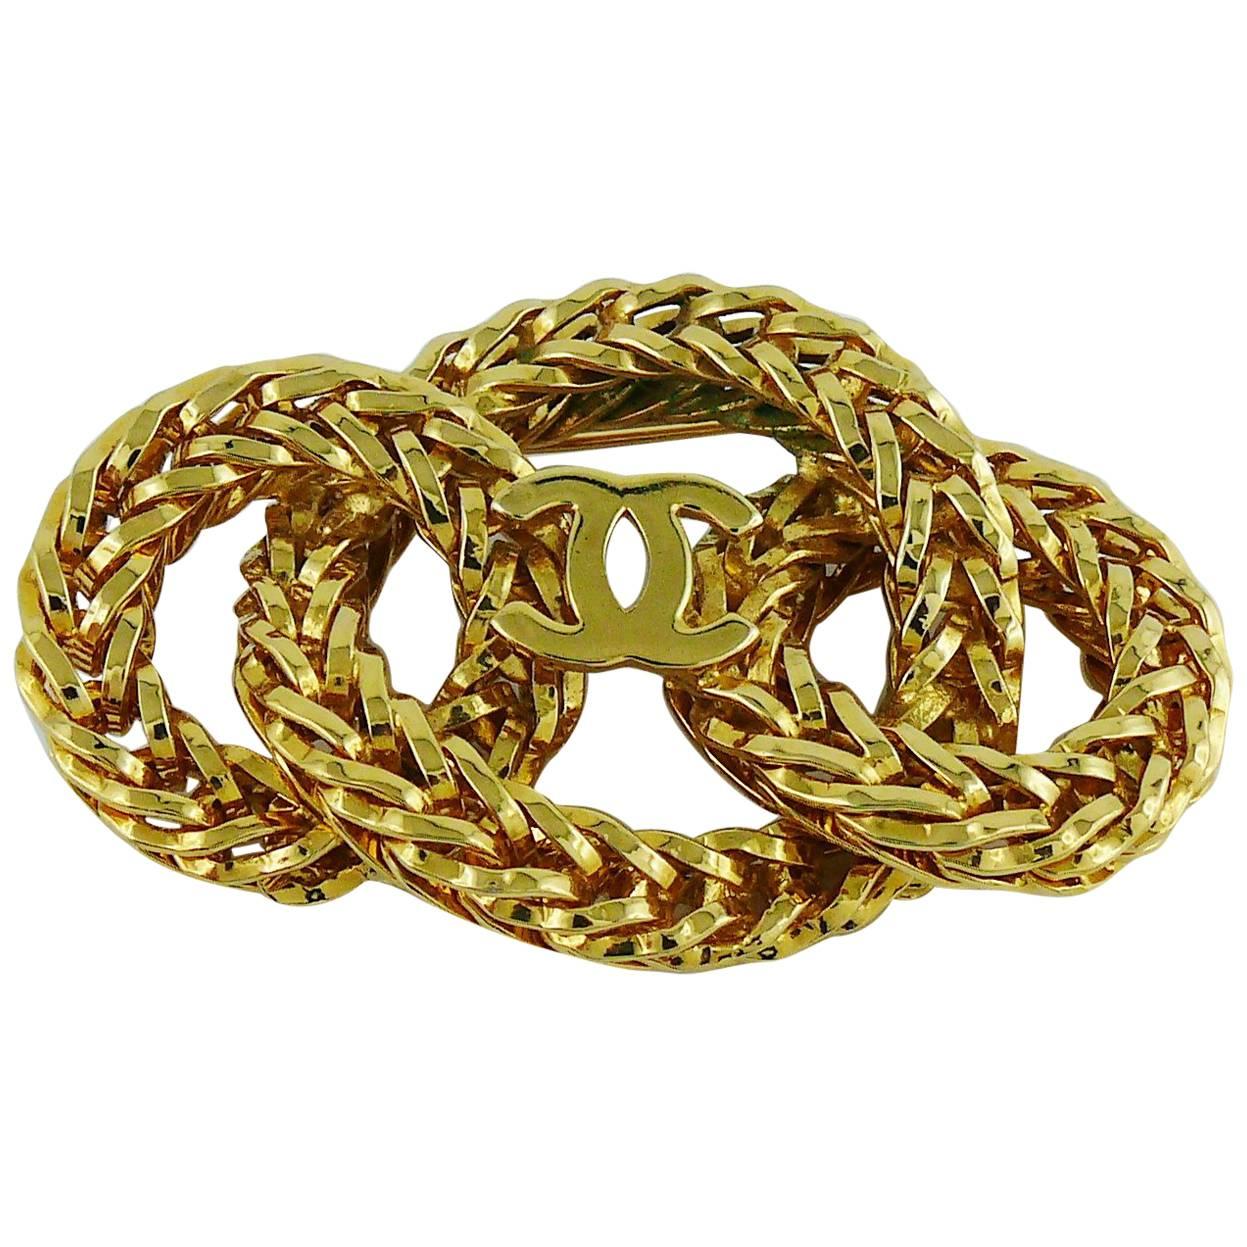 Chanel Vintage 1980s Gold Toned Chain Rings with CC Brooch